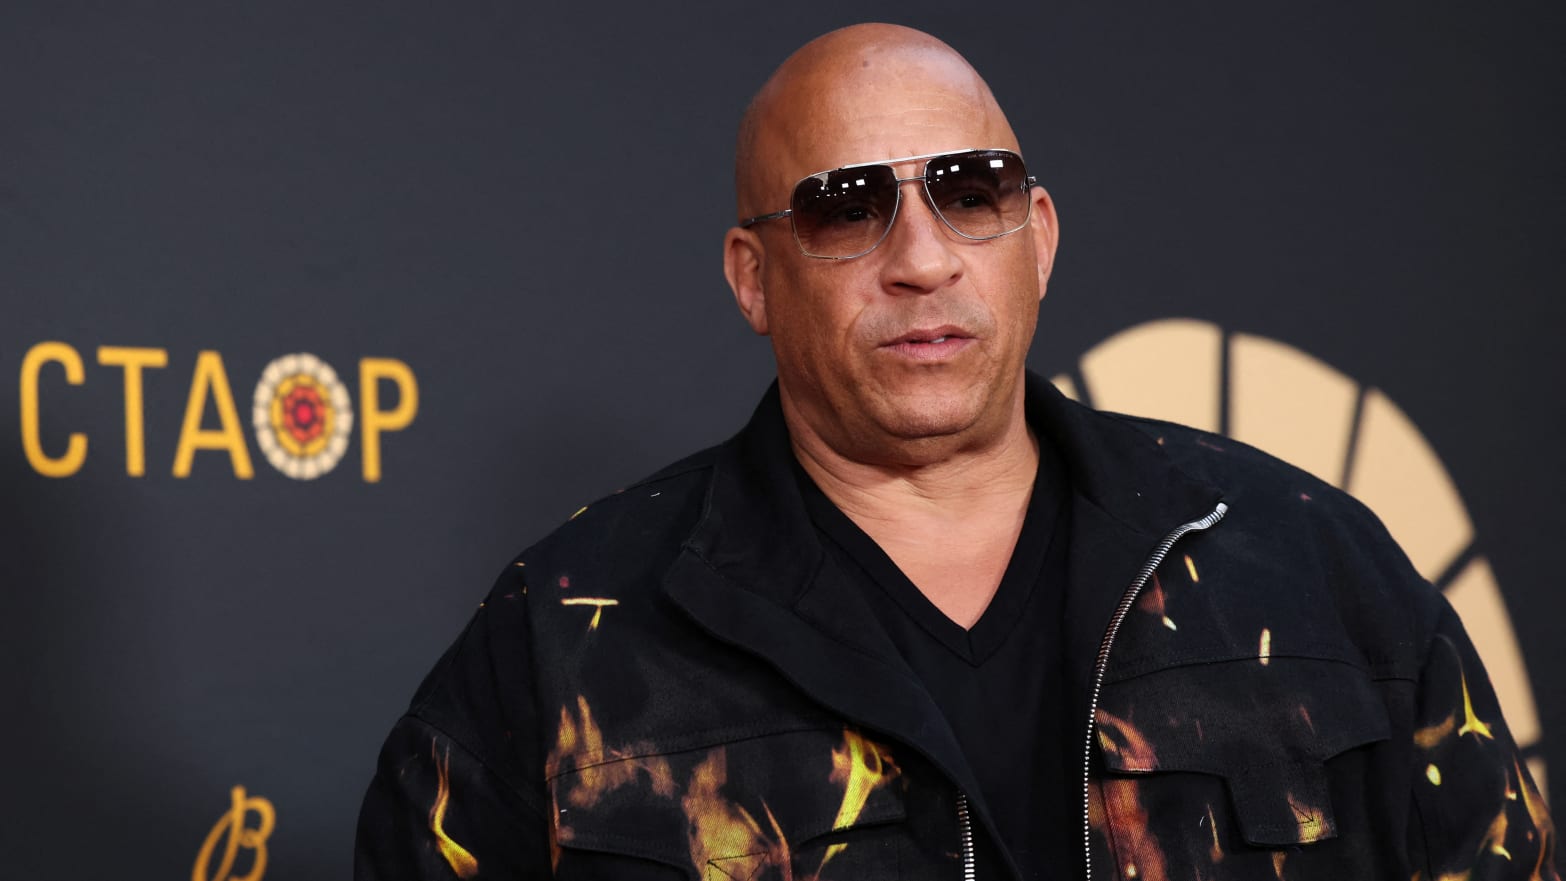 Vin Diesel, wearing sunglasses, stares forward as he’s photographed outside an event in Los Angeles.